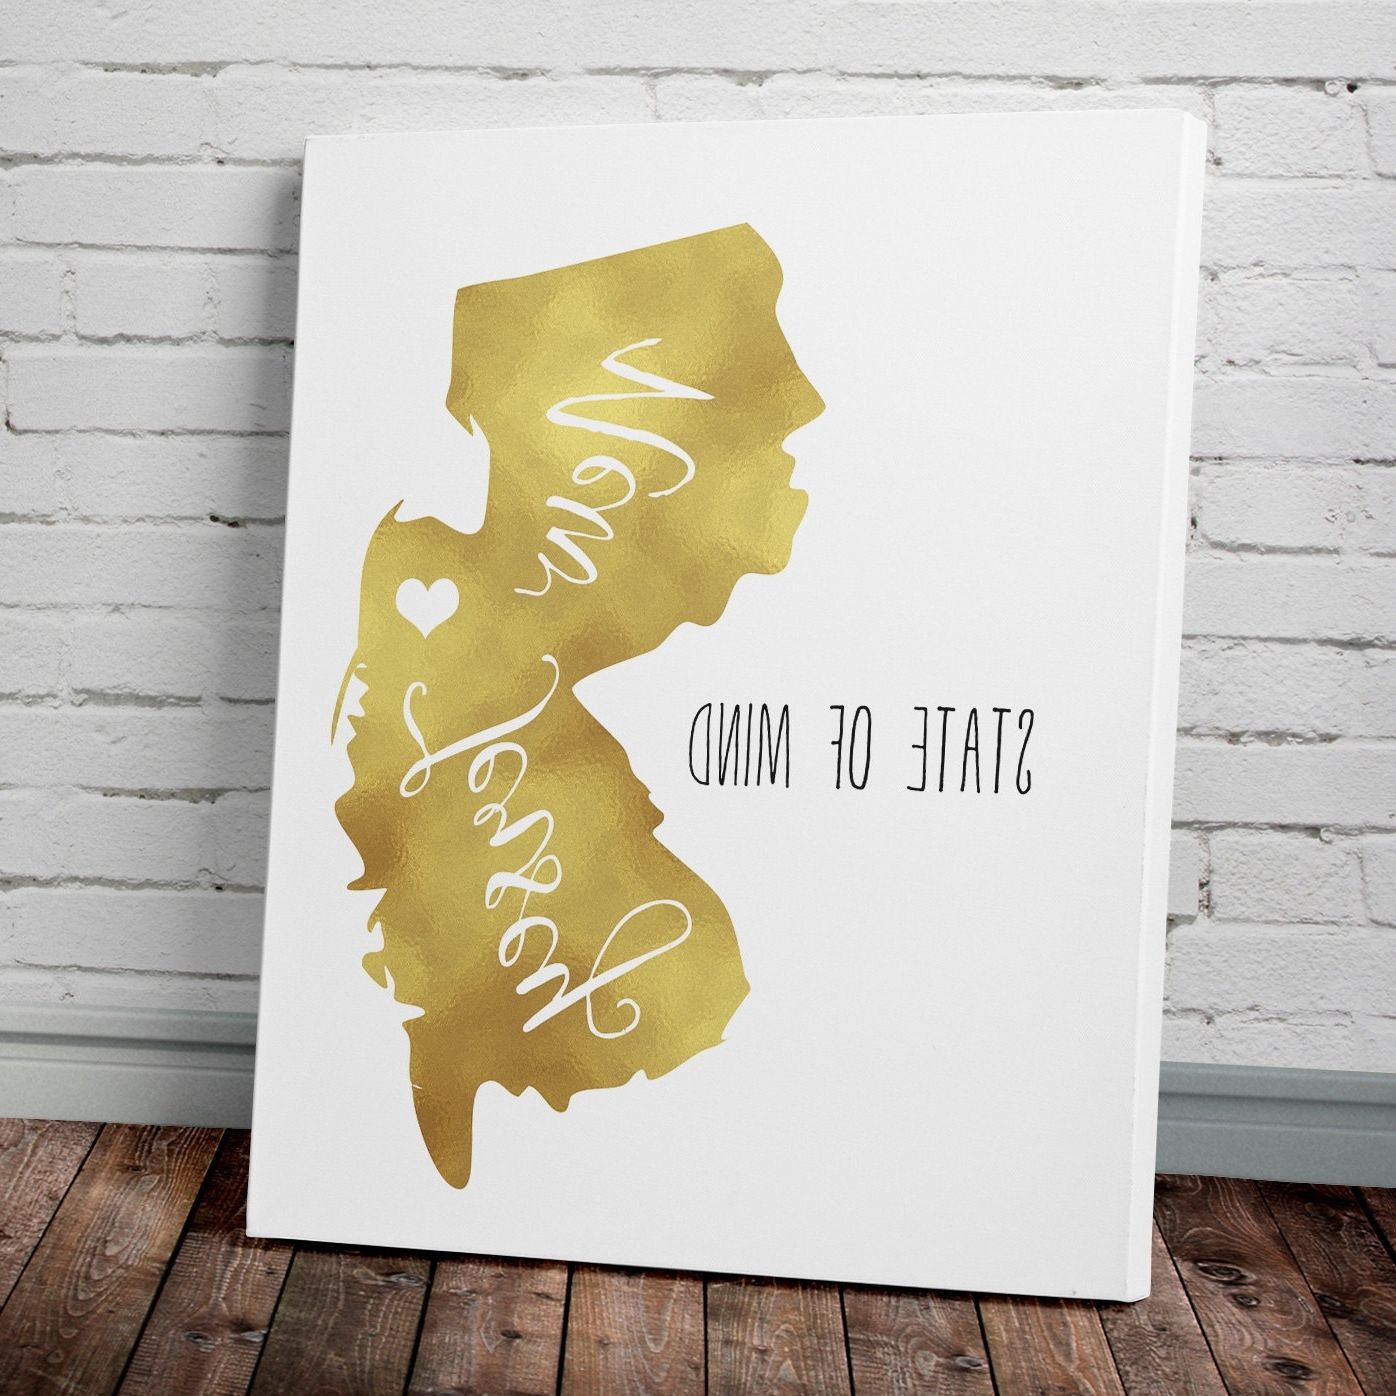 Most Recent Gold Canvas Wall Art For New Jersey Gold Foil Wall Art (View 15 of 15)